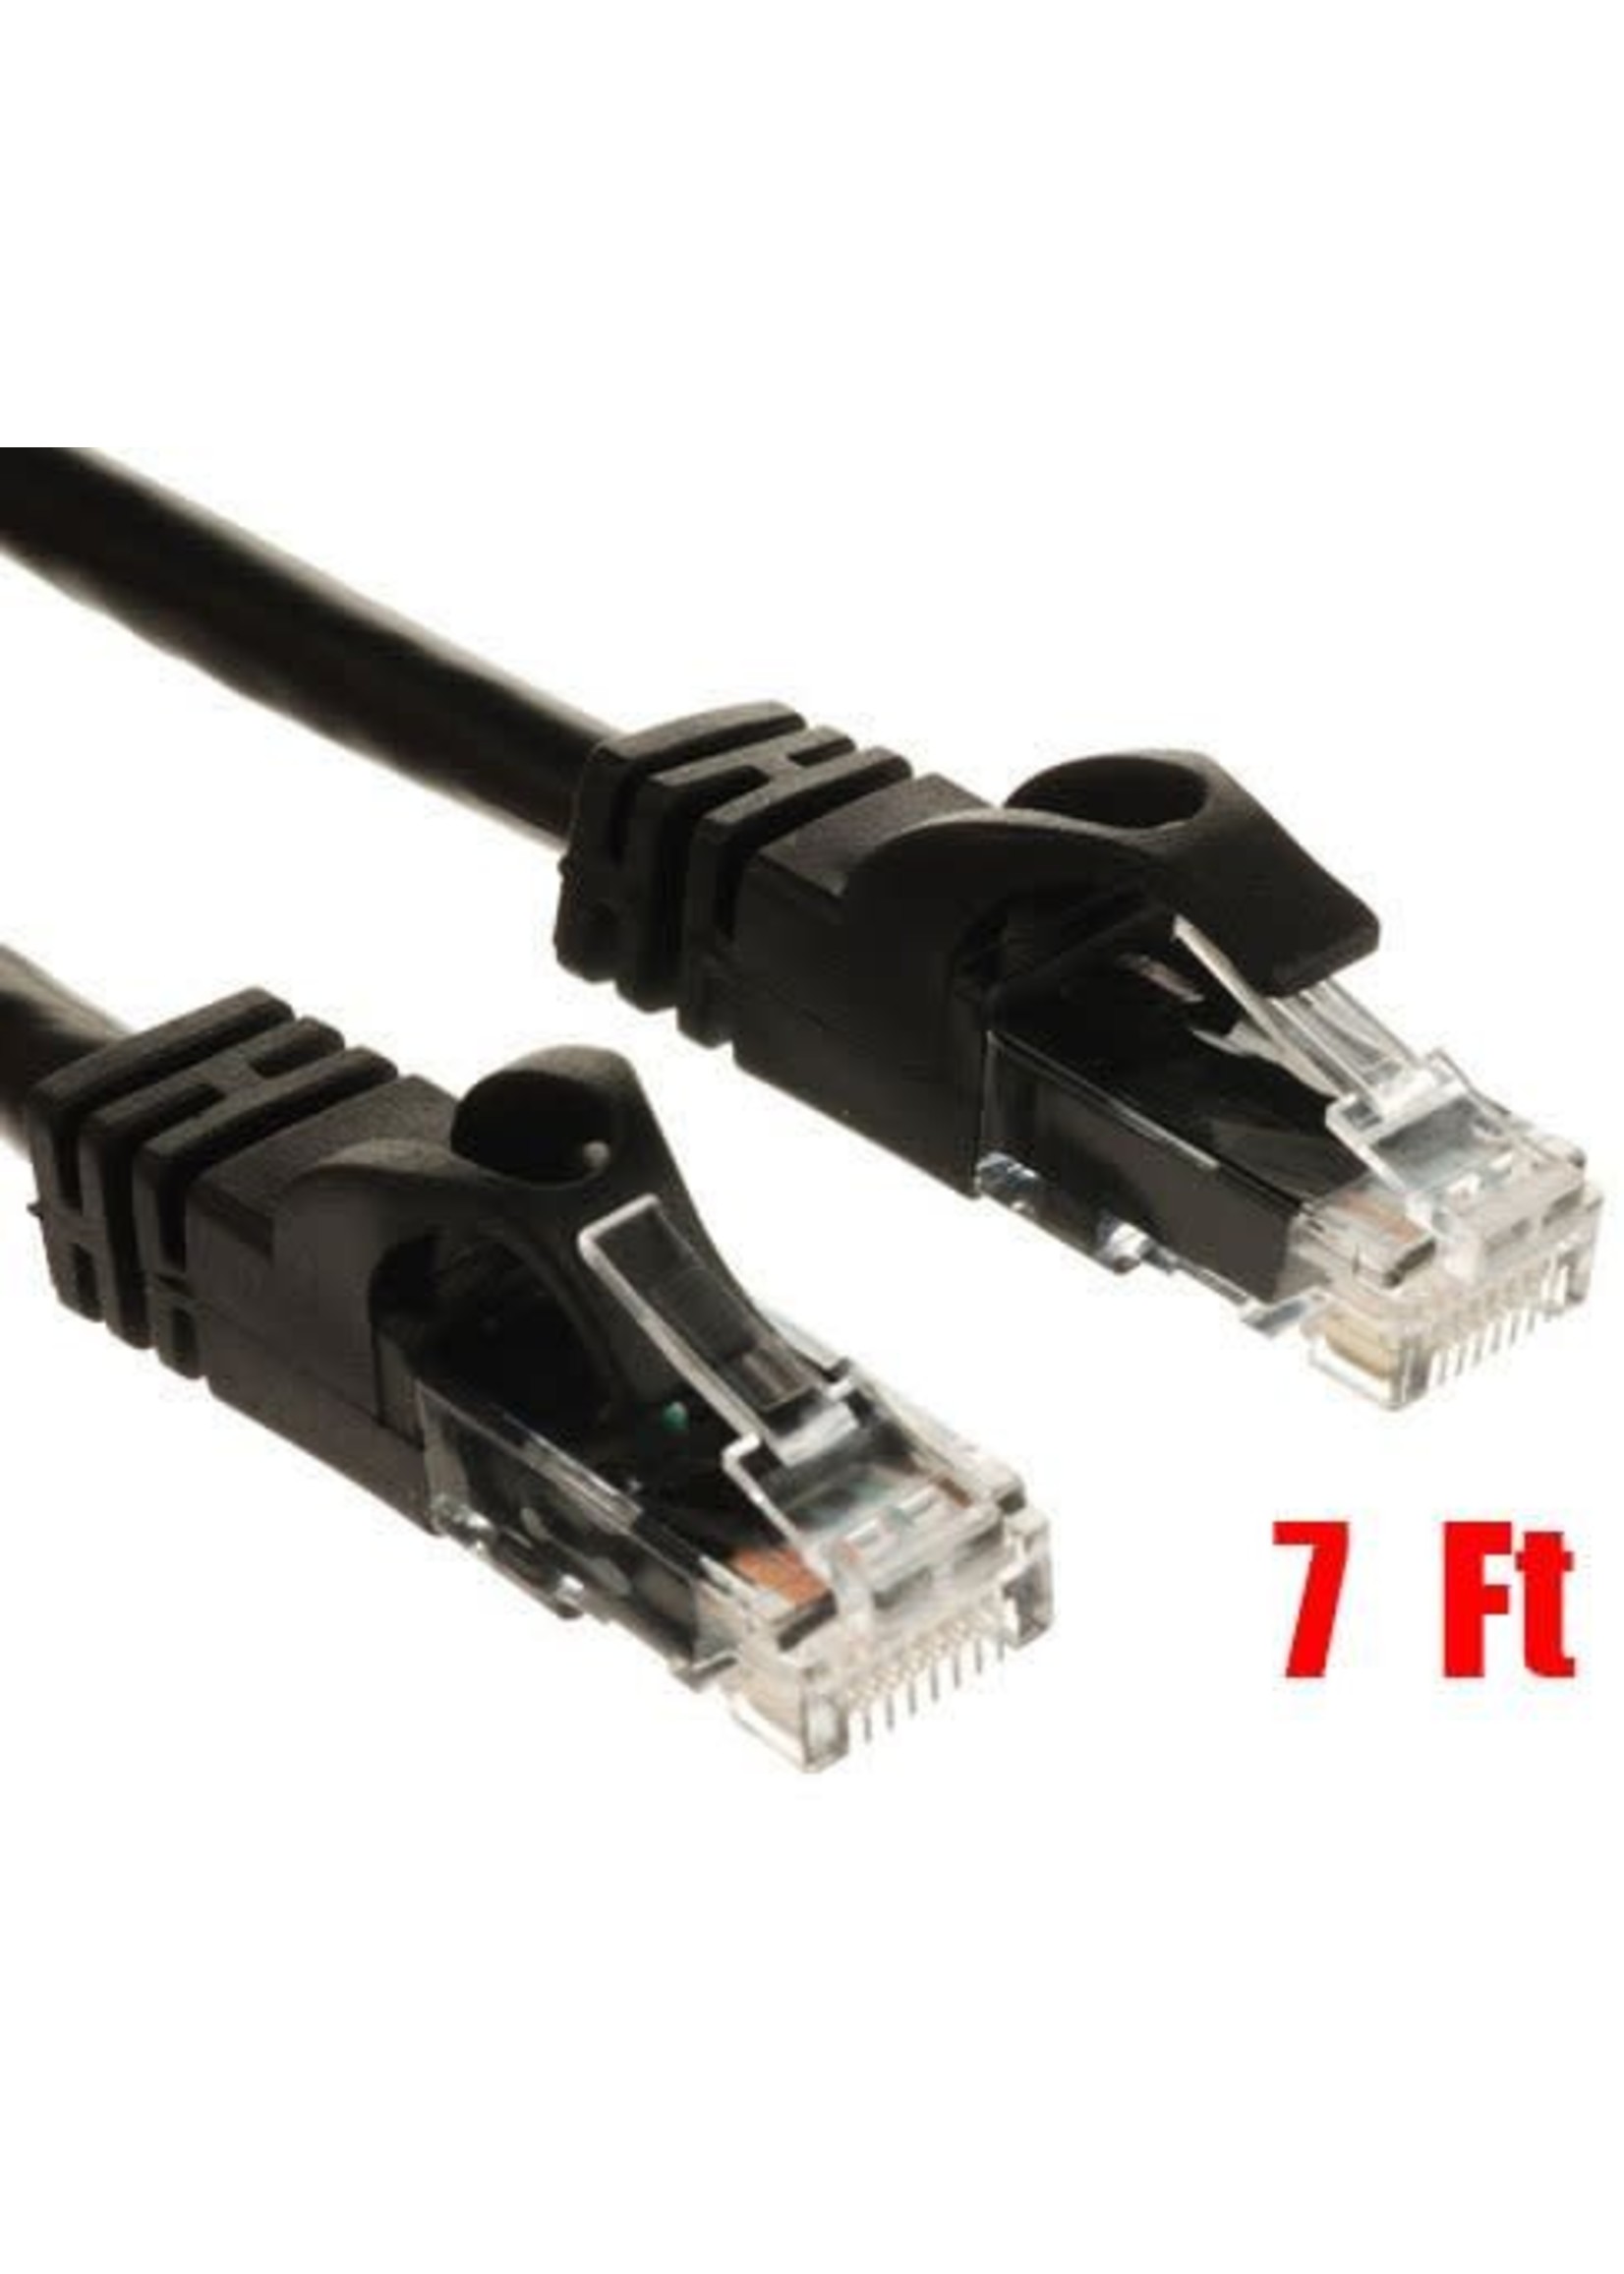 Network Ethernet 7 ft CAT6 Cable